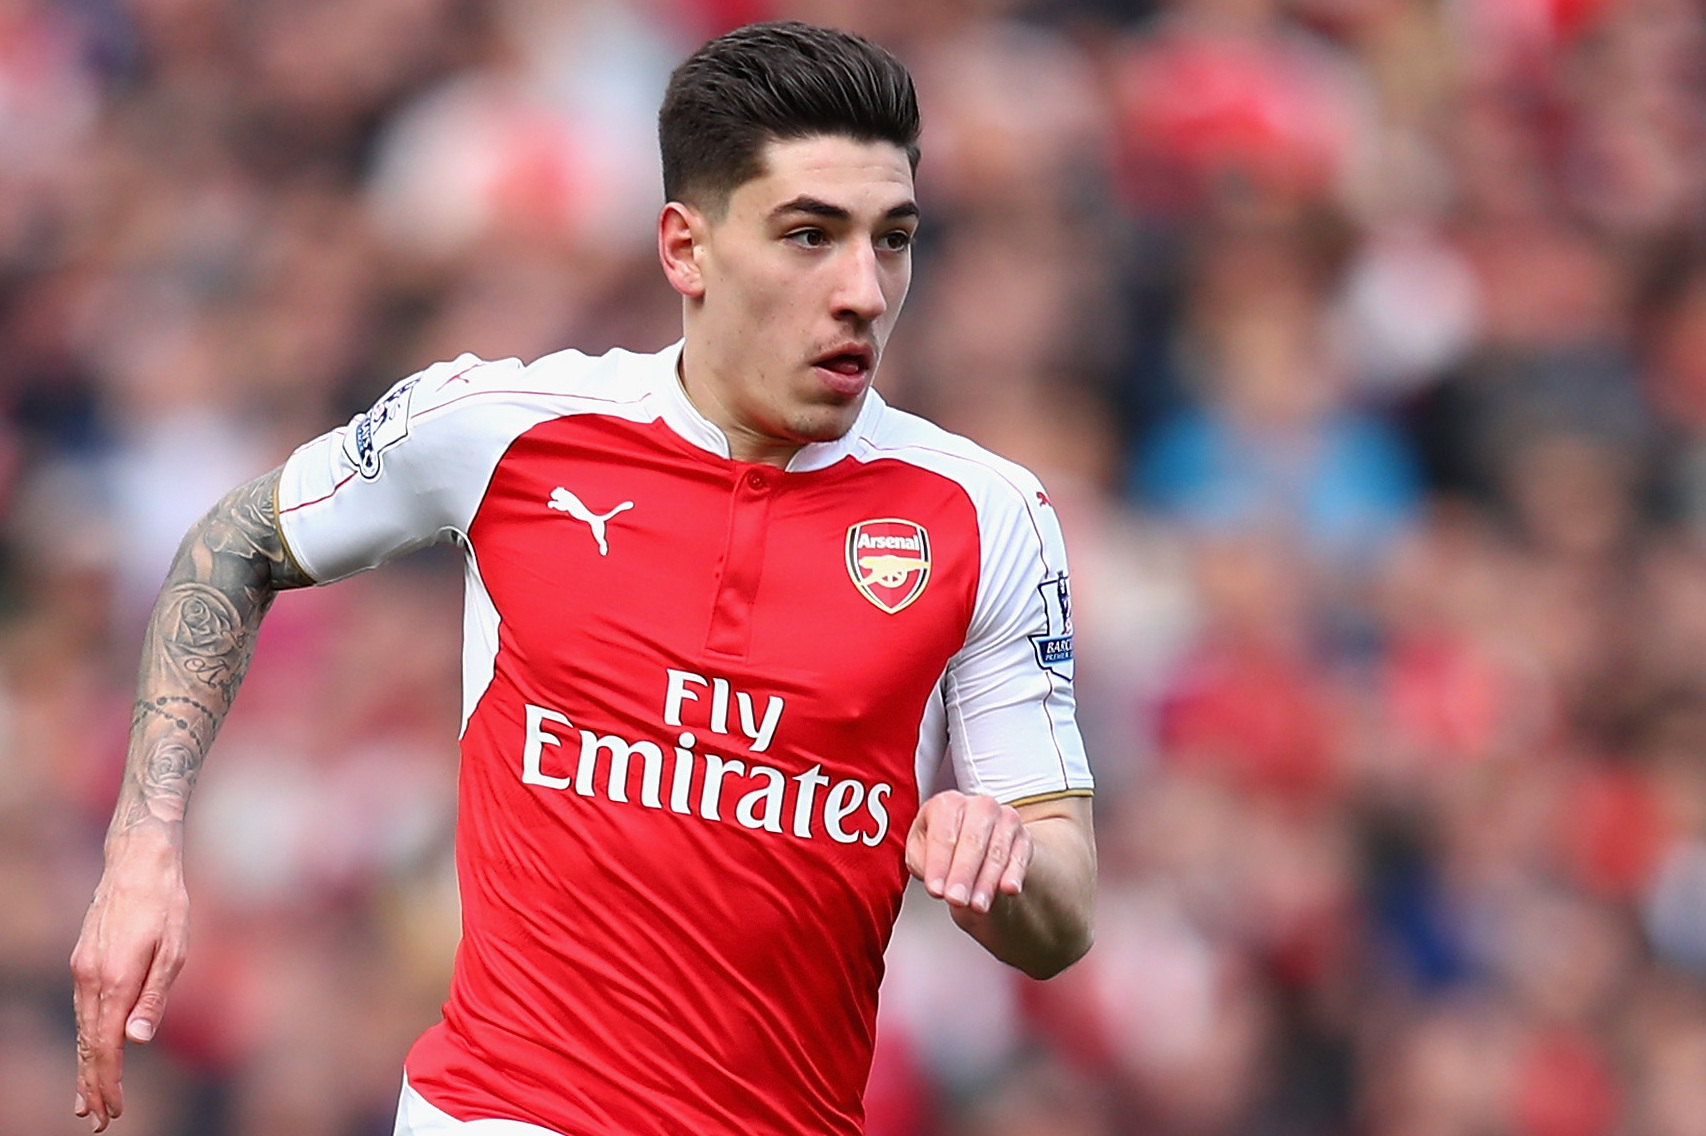 Arsenal star Hector Bellerin says 'impossible' for footballers to come out  due to culture of the sport - Attitude